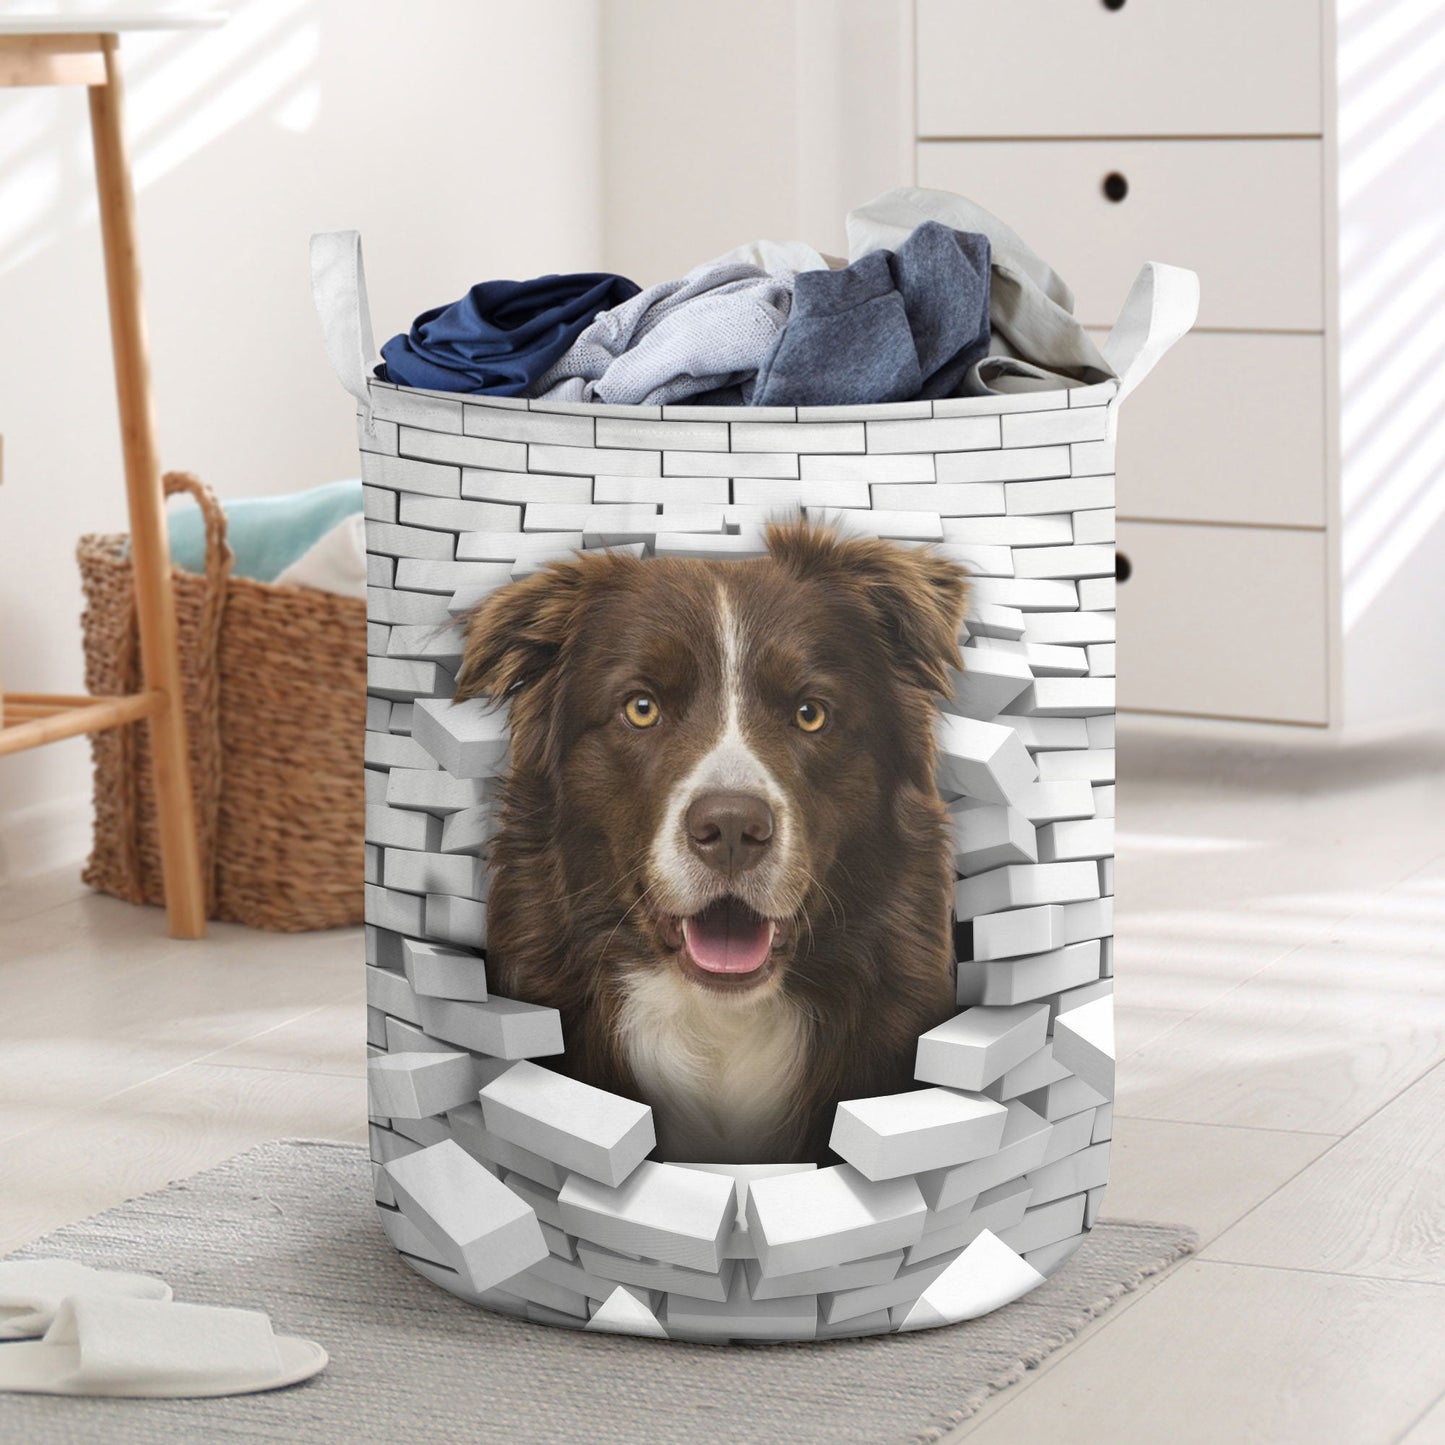 Border Collie 2 - In The Hole Of Wall Pattern Laundry Basket